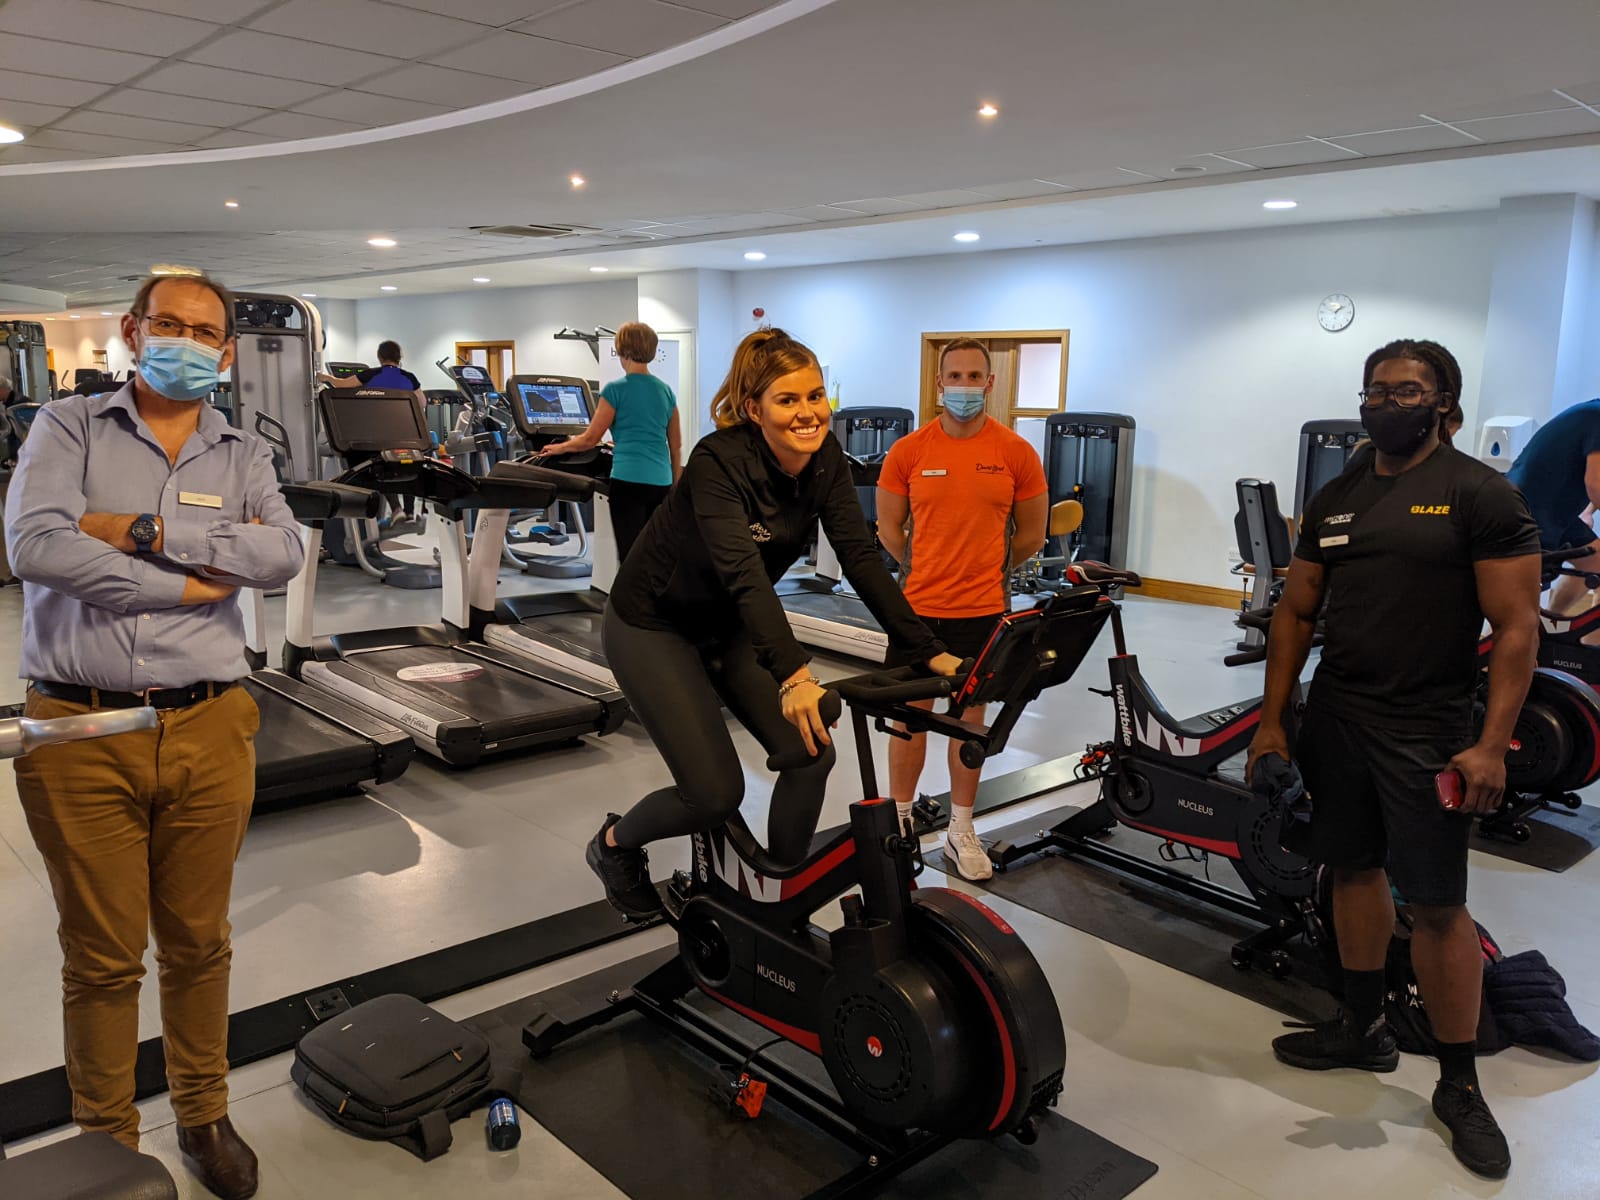 David Lloyd Cardiff redefine their indoor cycling offer with the